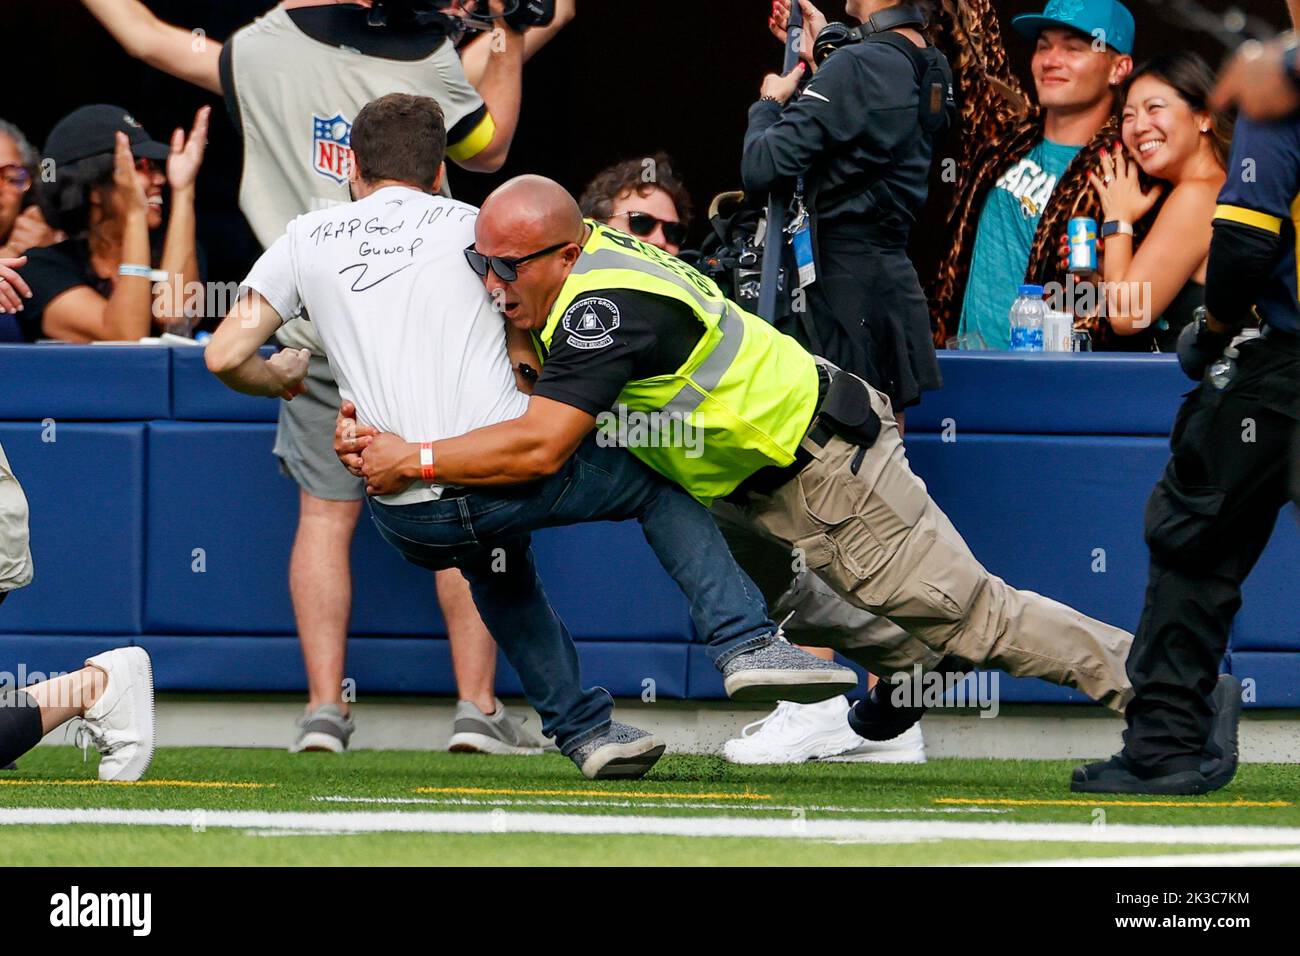 Los Angeles, United States. 25th Sep, 2022. A man is held down by security after he ran on the field in a timeout during the NFL football game between Los Angeles Chargers and Jacksonville Jaguars at SoFi Stadium. Final score; Chargers 10:38 Jaguars. Credit: SOPA Images Limited/Alamy Live News Stock Photo